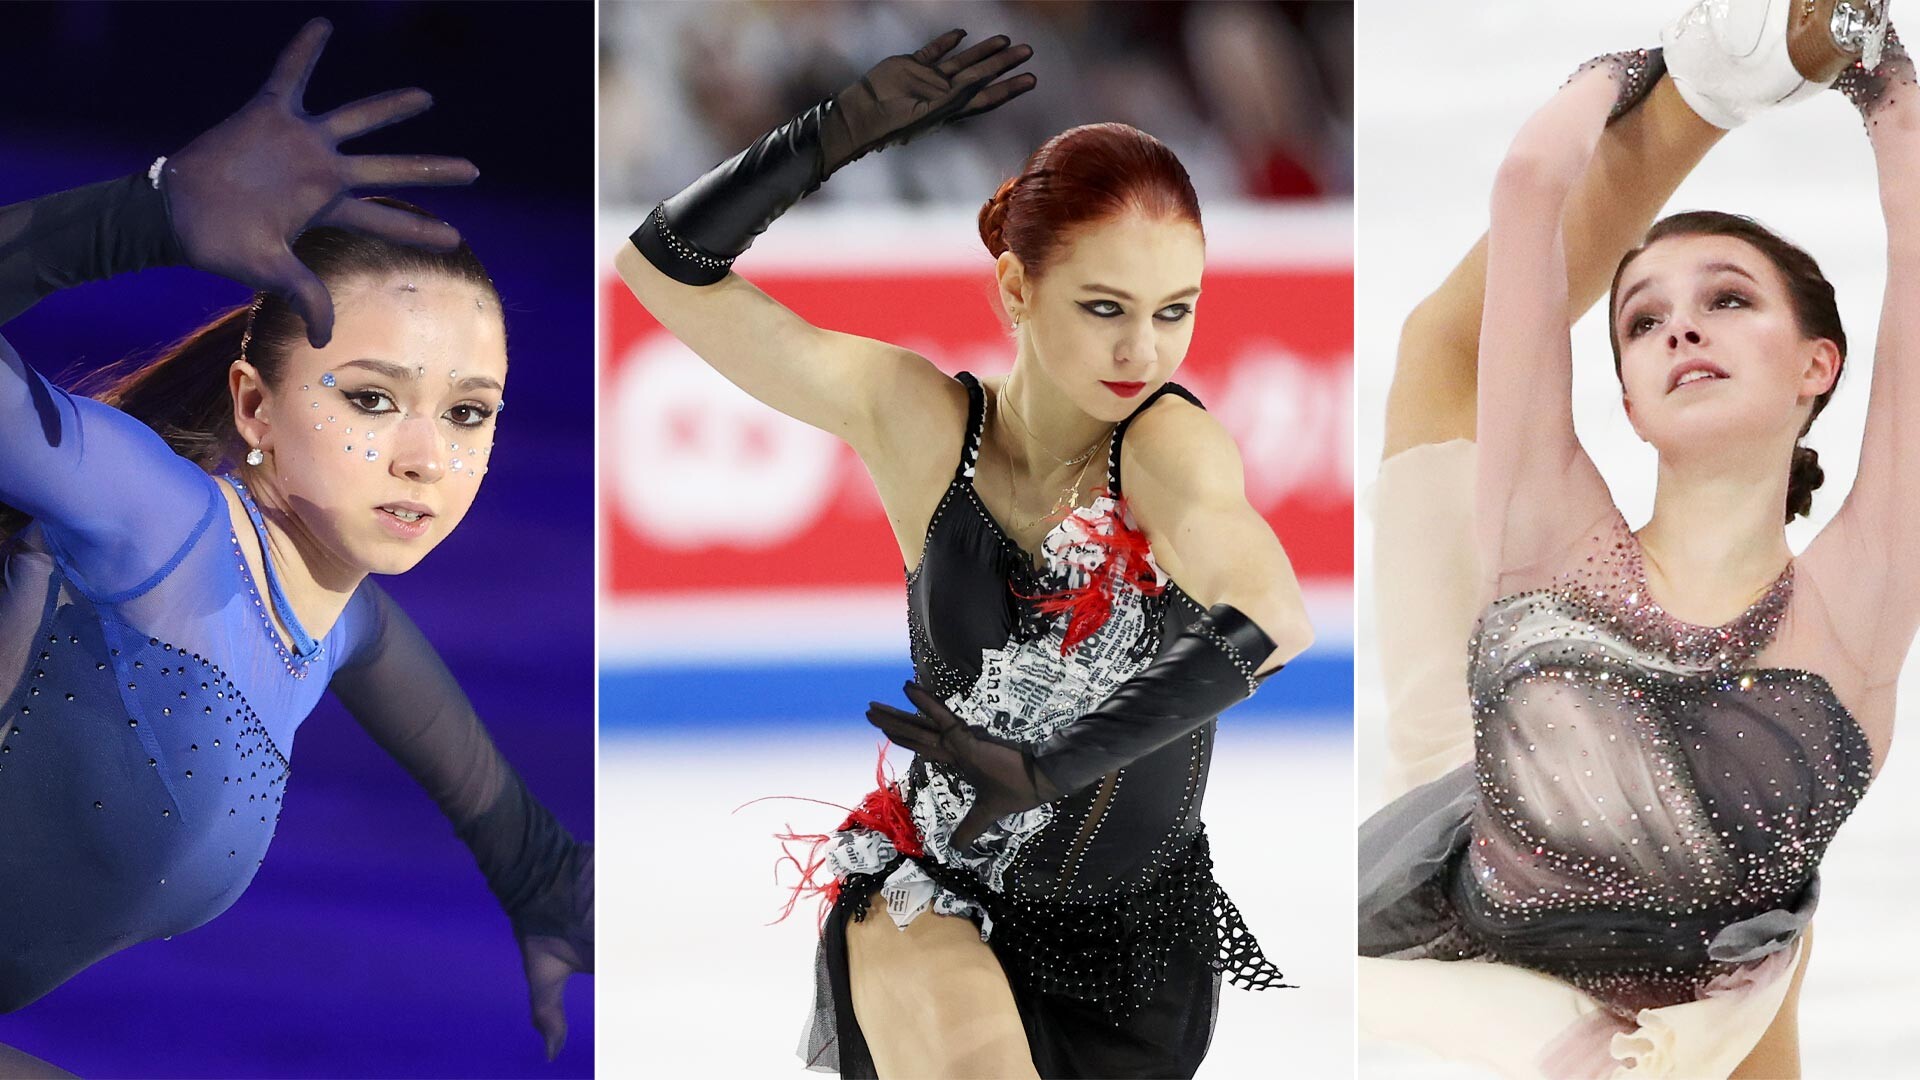 Meet the Russian figure skaters of the 2022 Winter Olympics (PHOTOS